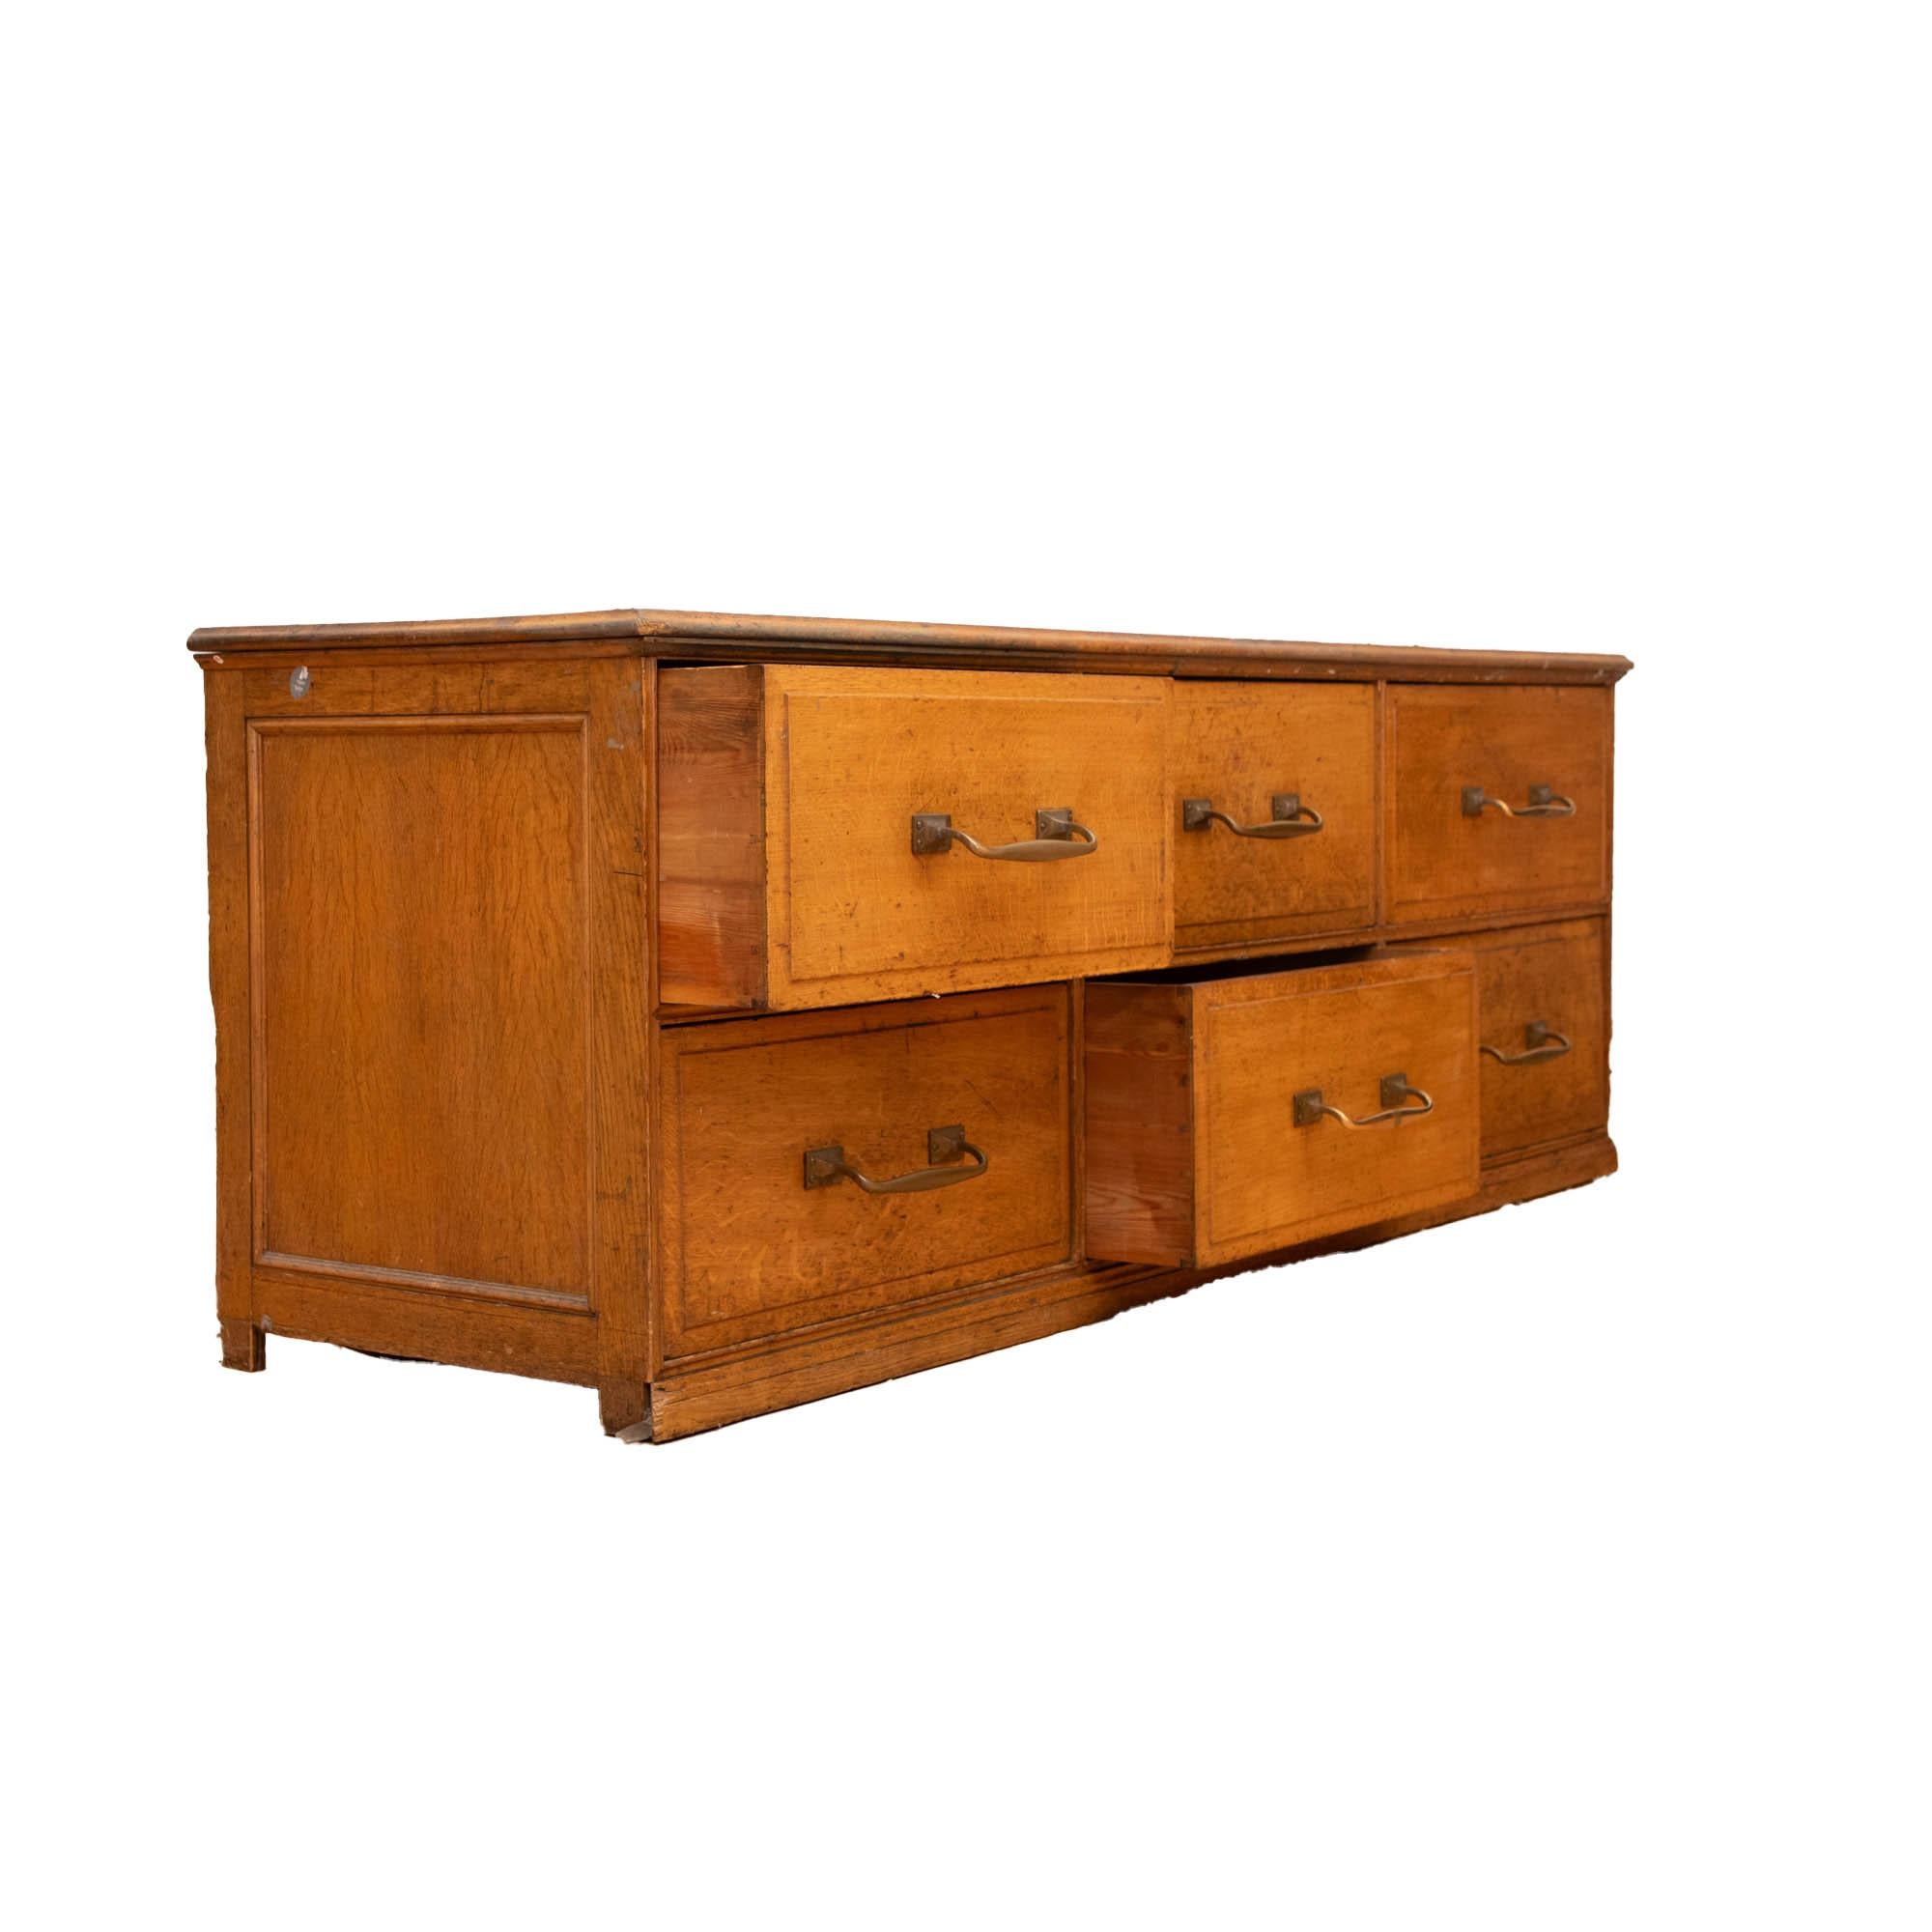 Victorian 1900s Haberdashery counter, vintage kitchen island, retail counter display For Sale